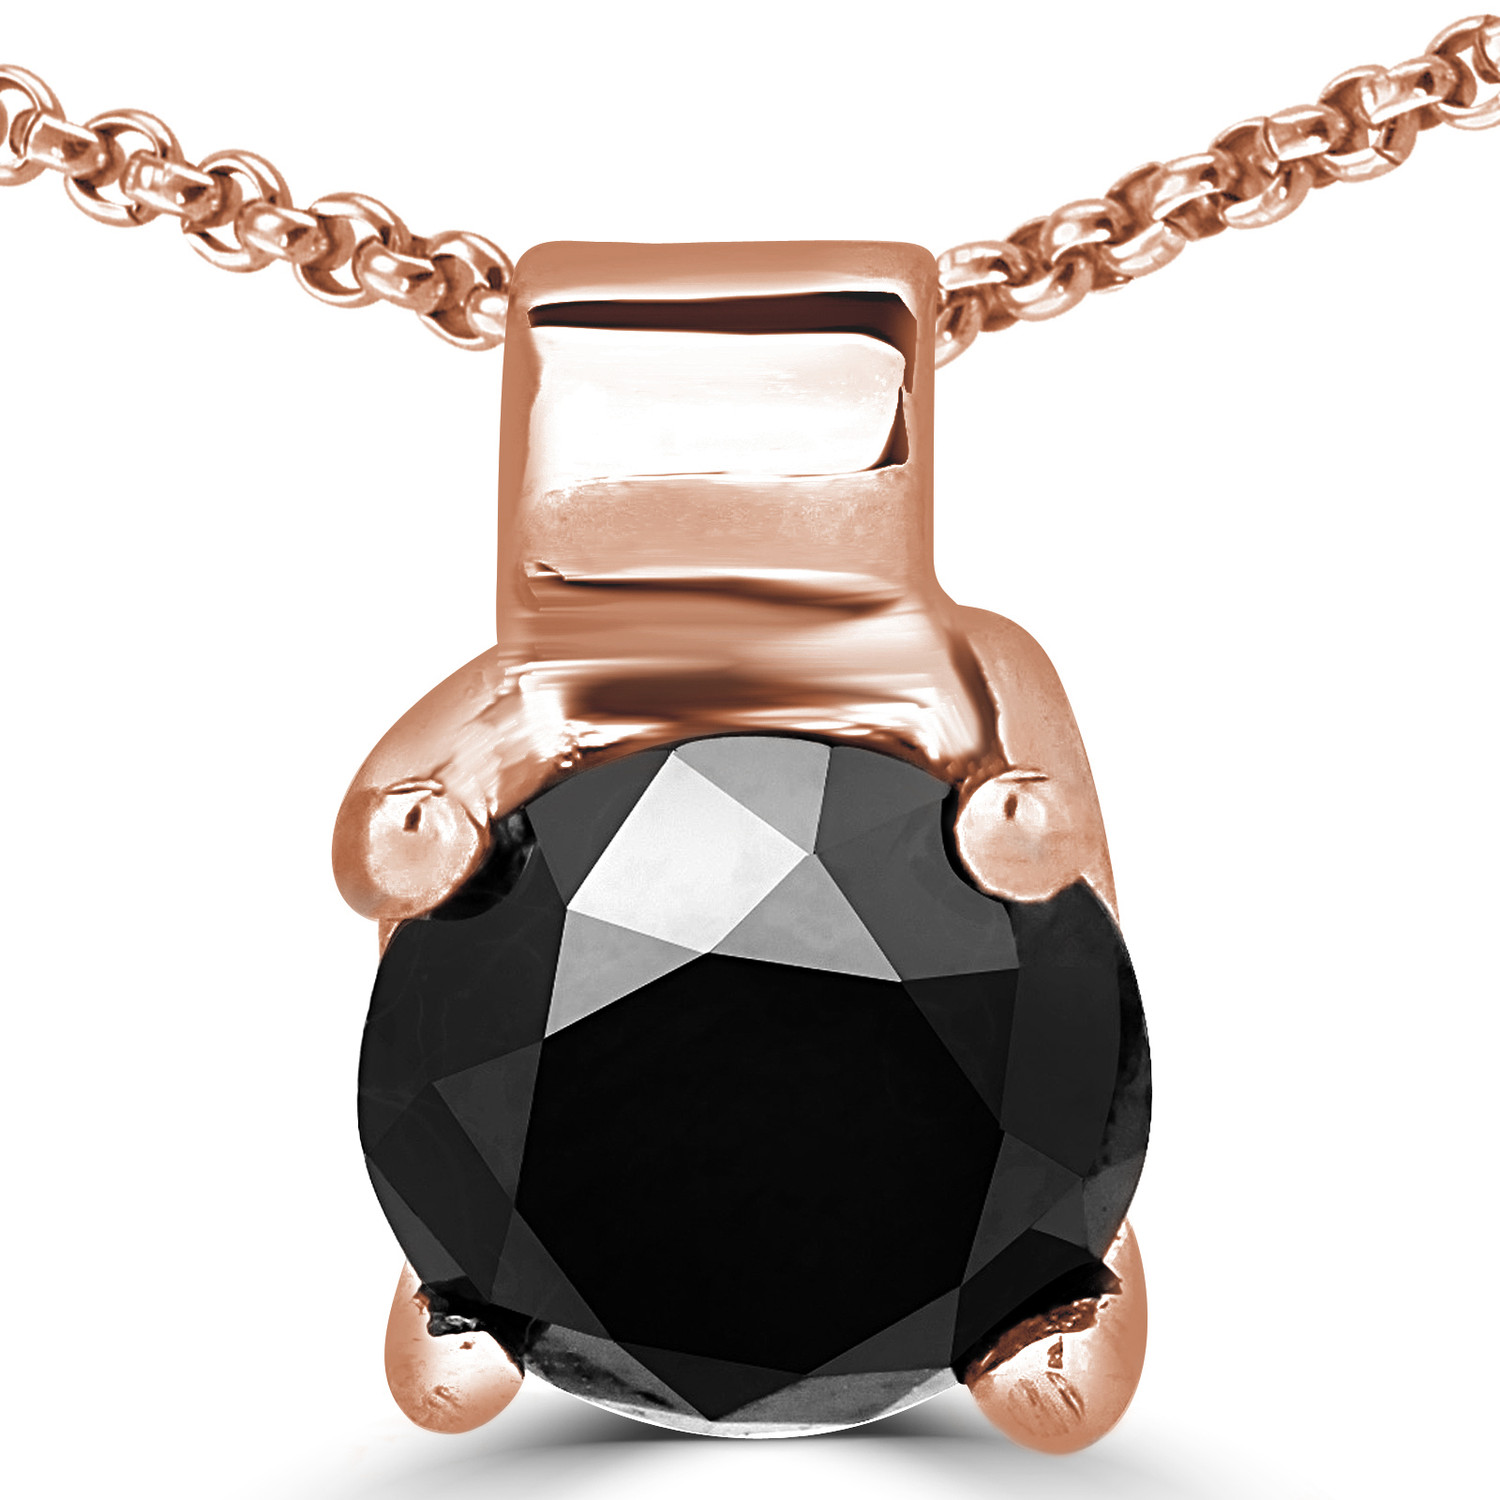 Round Black Diamond 4-Prong Solitaire Pendant Necklace in 14K Rose Gold with Chain (MVSPB0002-R)